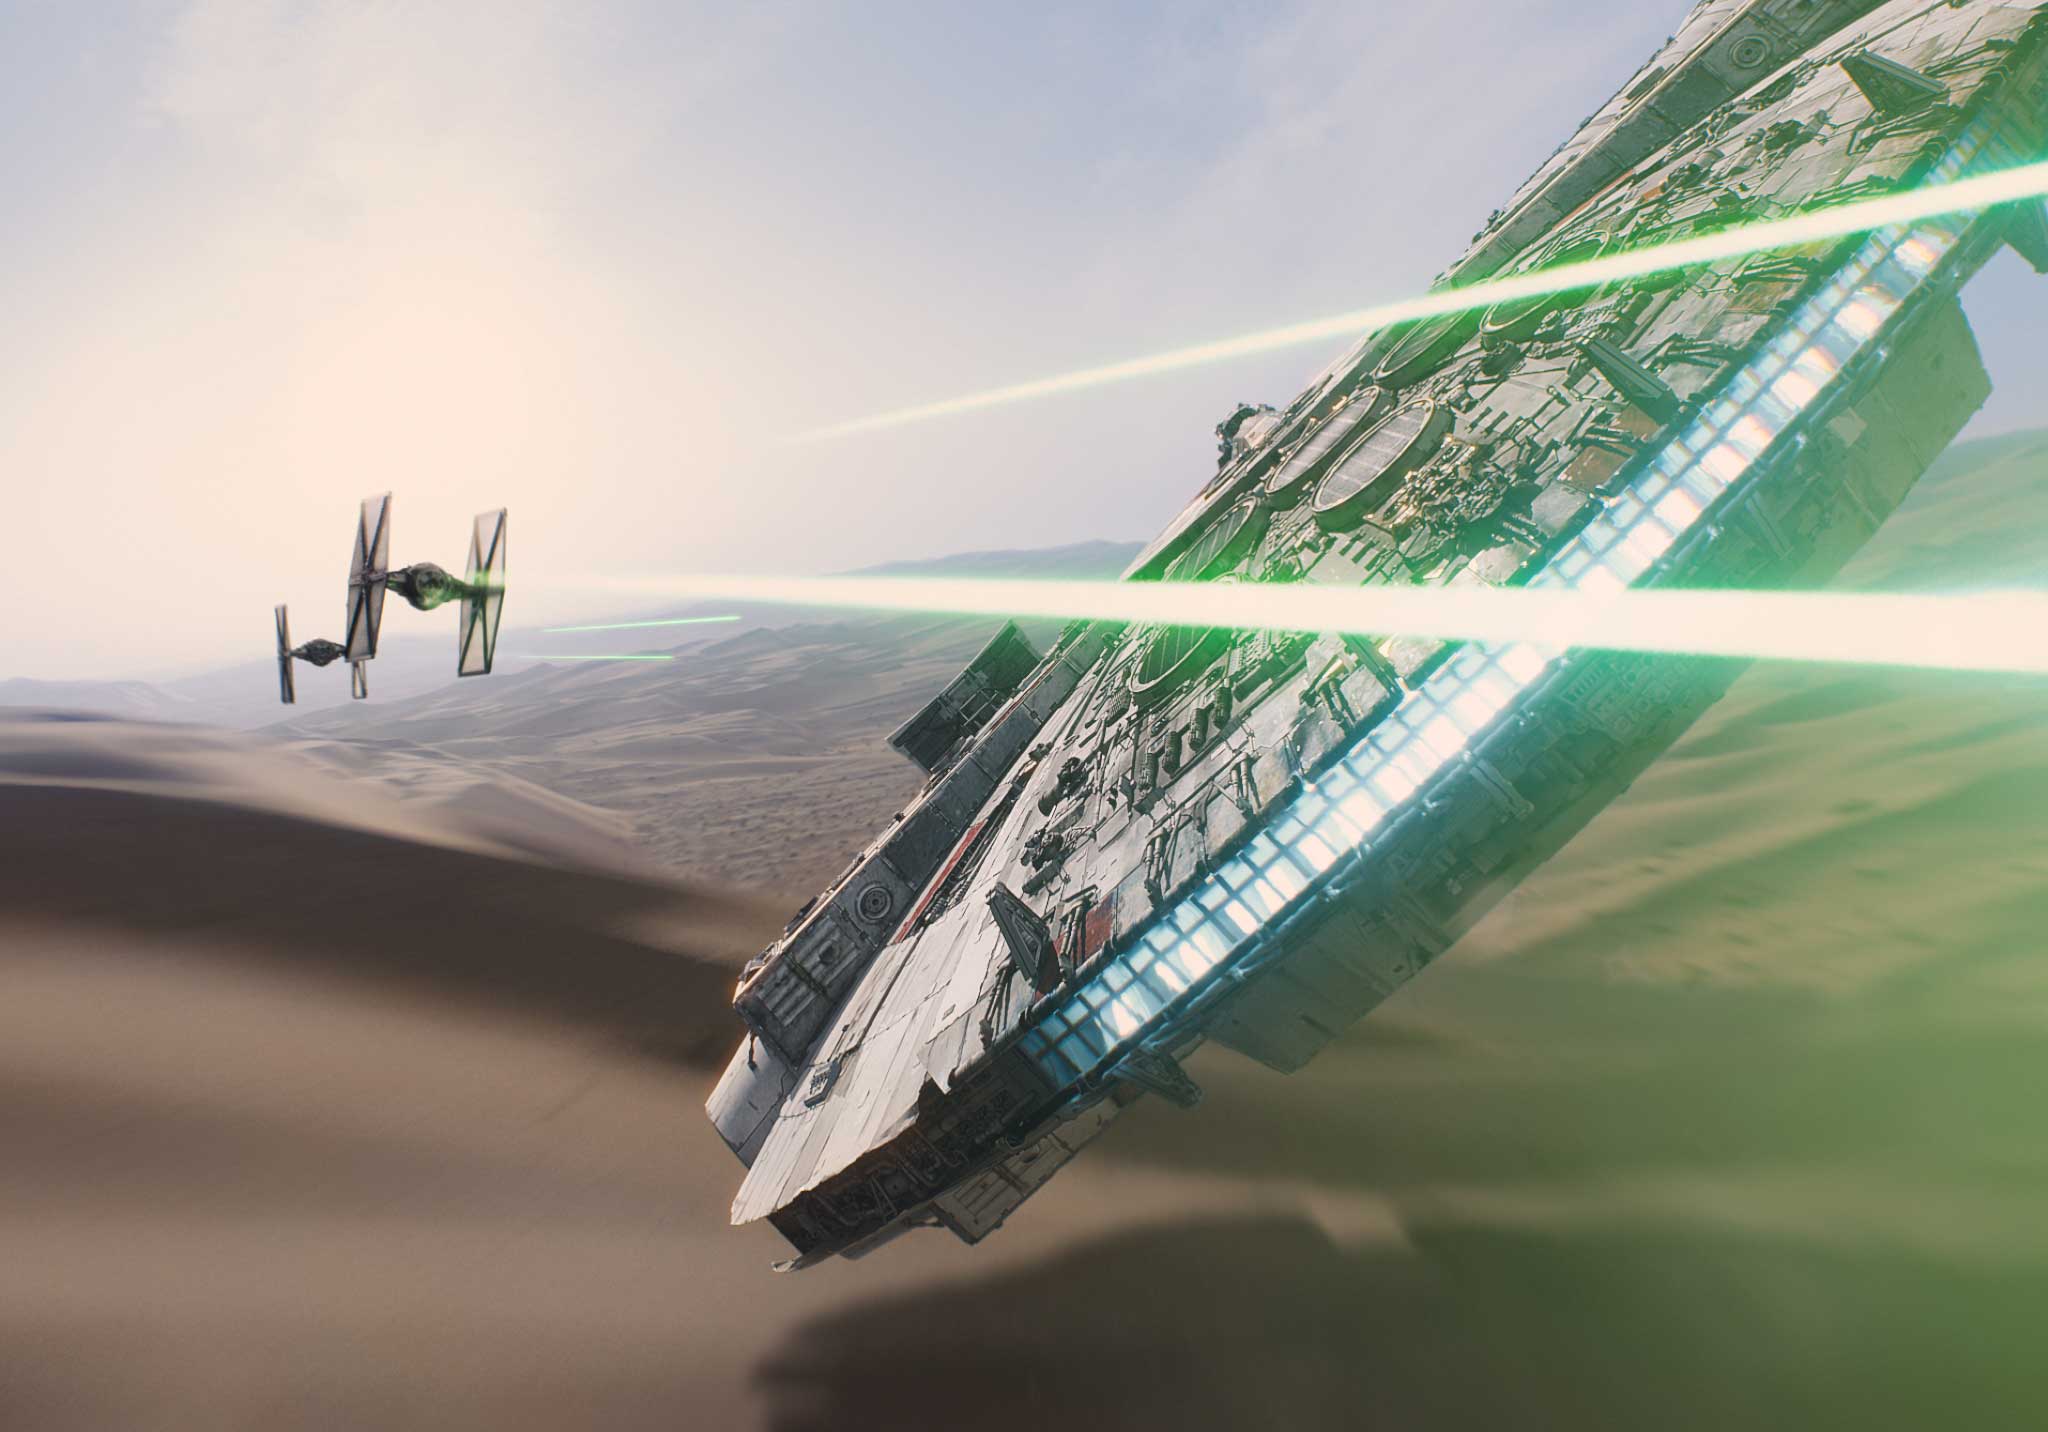 In this image released by Disney, a scene is shown from the upcoming film, "Star Wars: The Force Awakens," expected in theaters on Dec. 18, 2015.